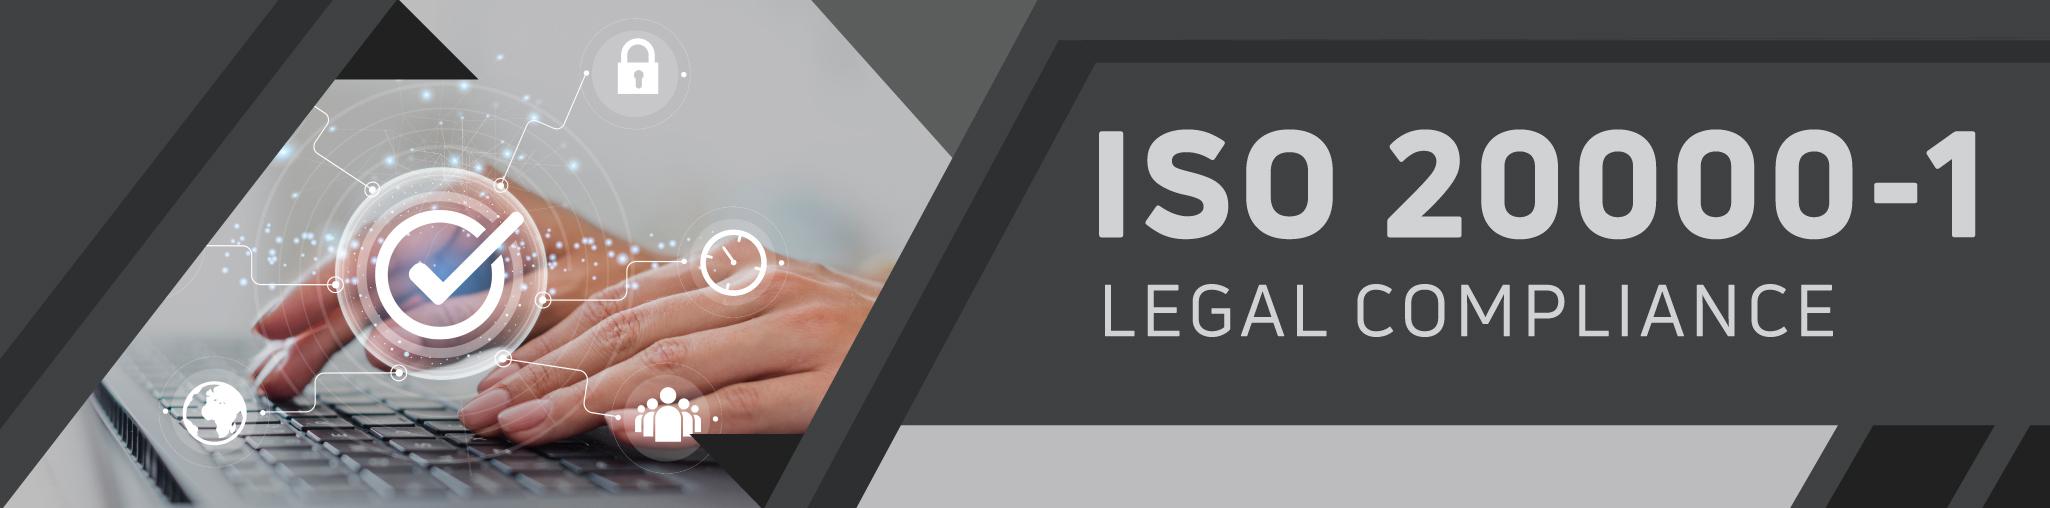 ISO 20000-1 Legal Compliance